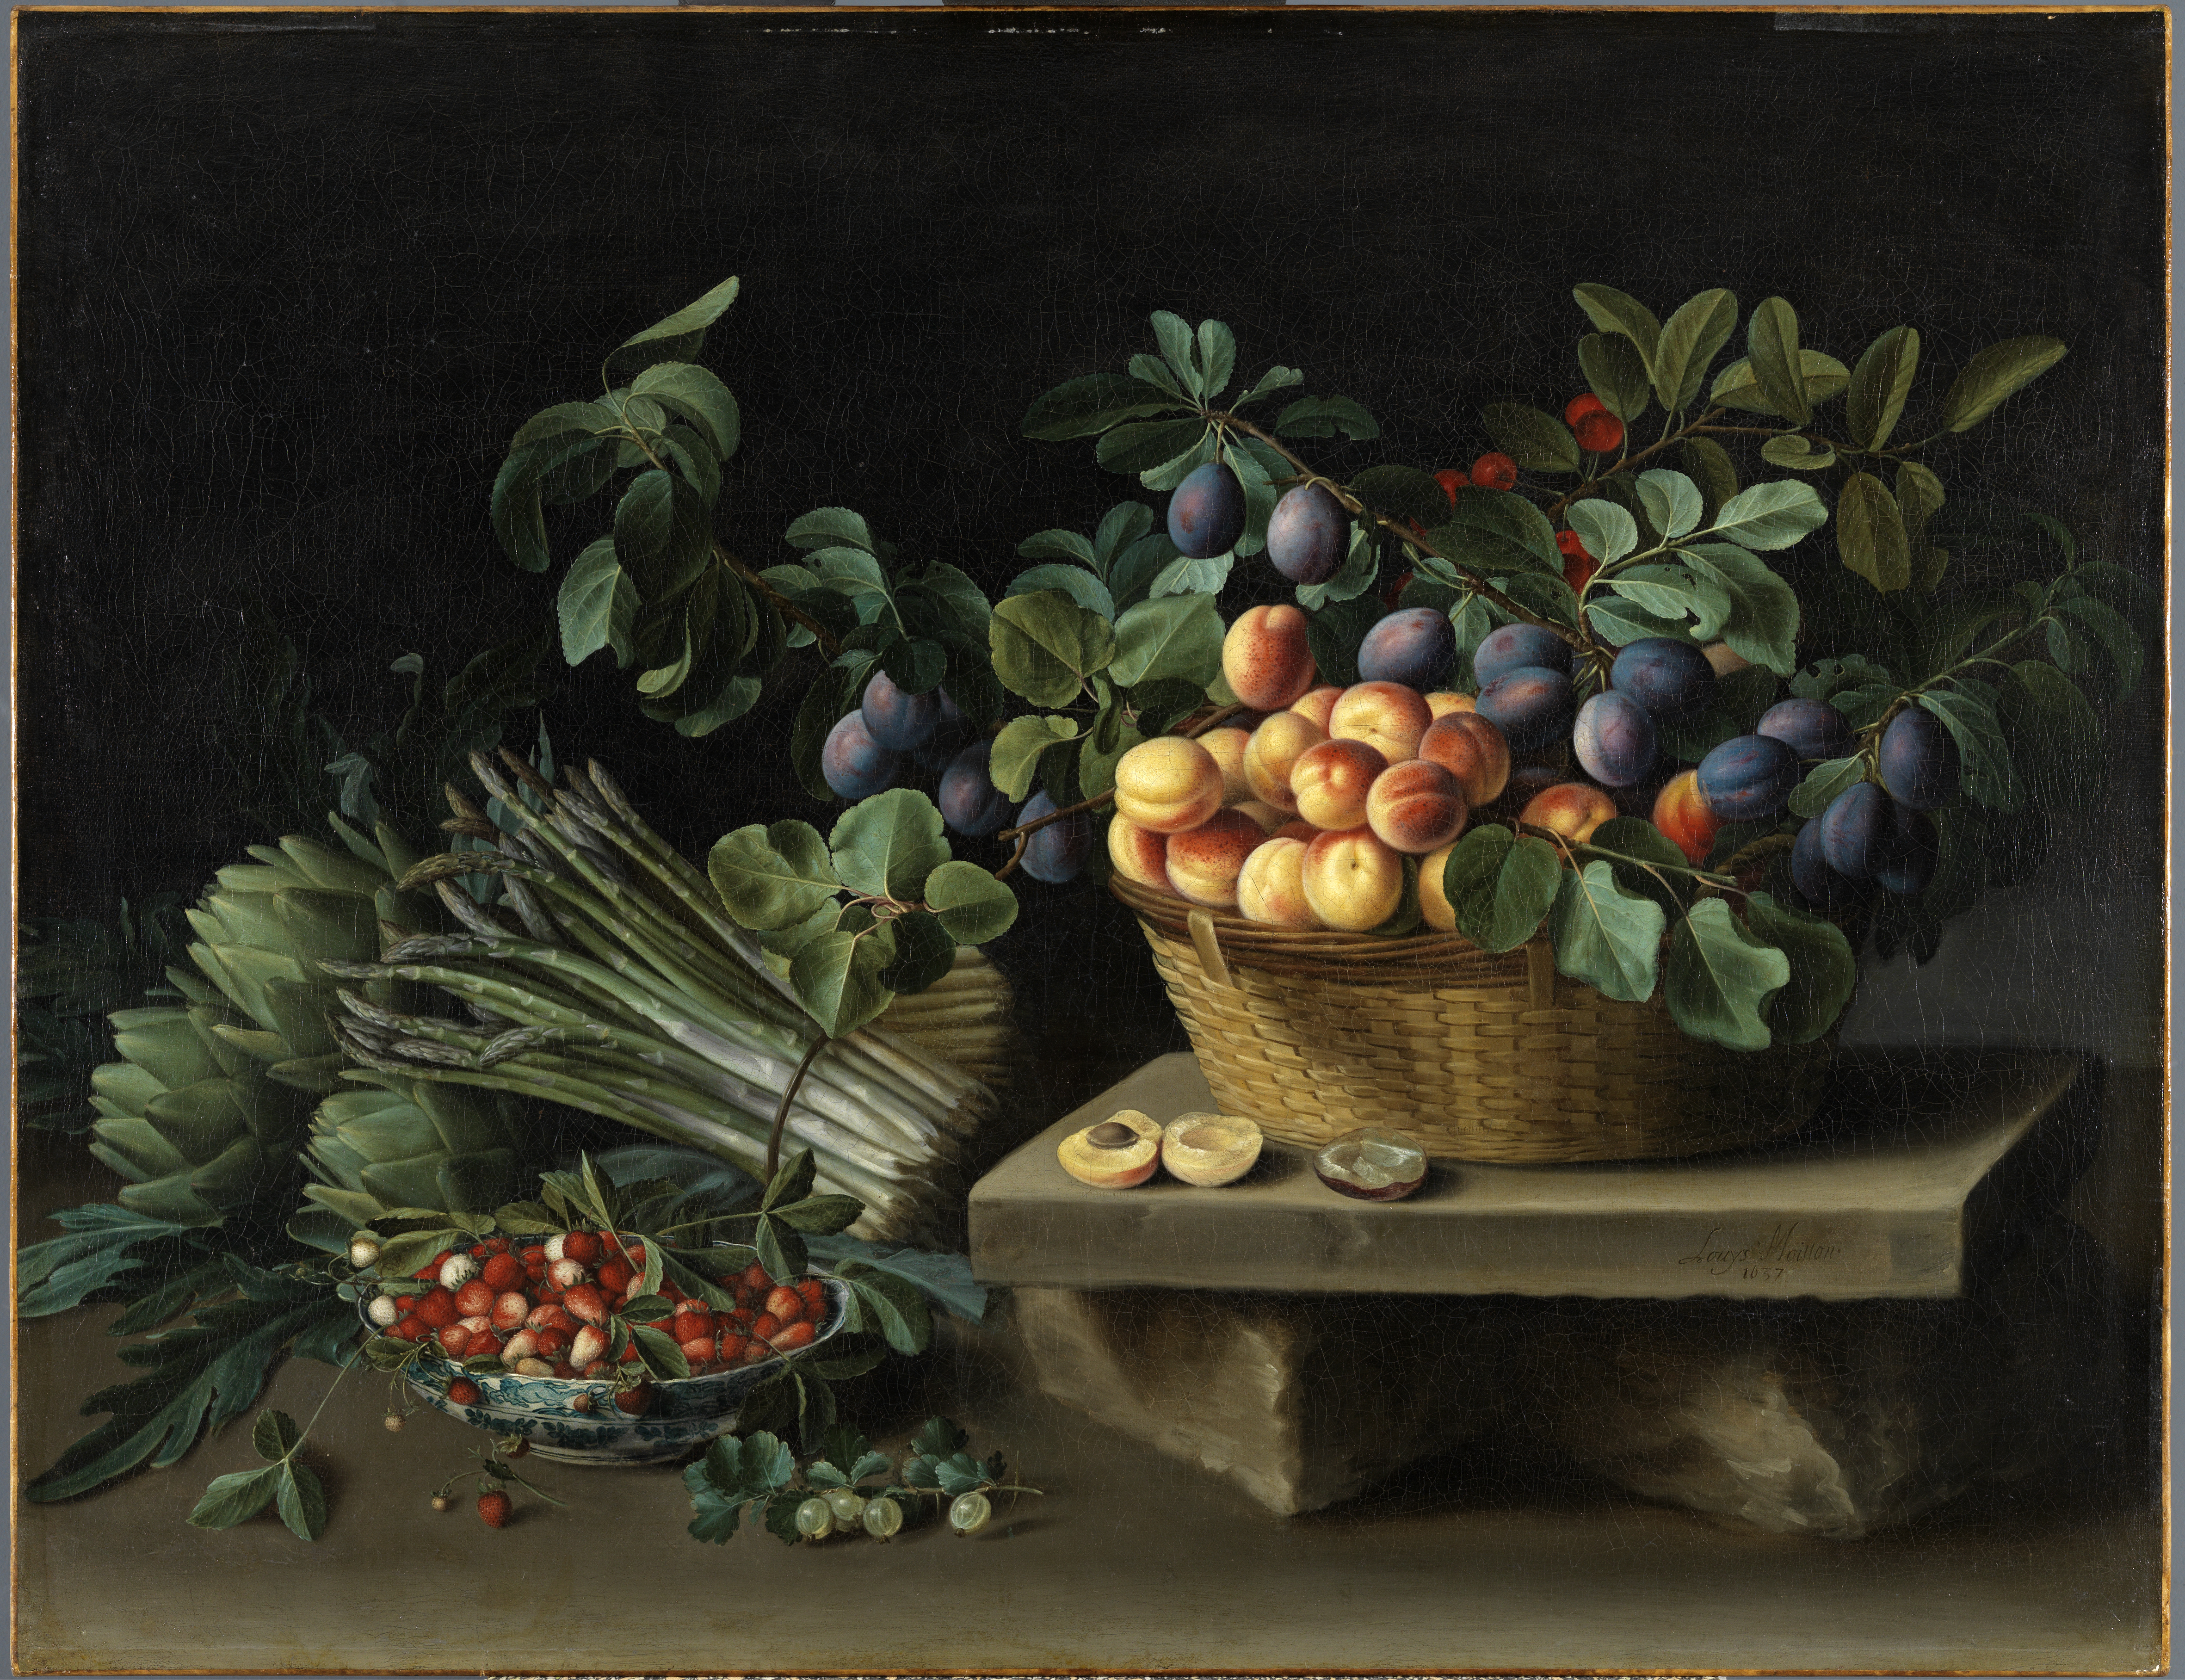 Fruits and vegetables are arranged on a simple table against a black background. On a slab of rock, there is a basket of plums, peaches, and other small fruits. To its left, there is a smaller white and blue porcelain bowl of strawberries. Just behind that bowl, there are bunches of asparagus tied with brown cord and artichokes. It is a lush scene, with green foliage adorning the various arrangements.  